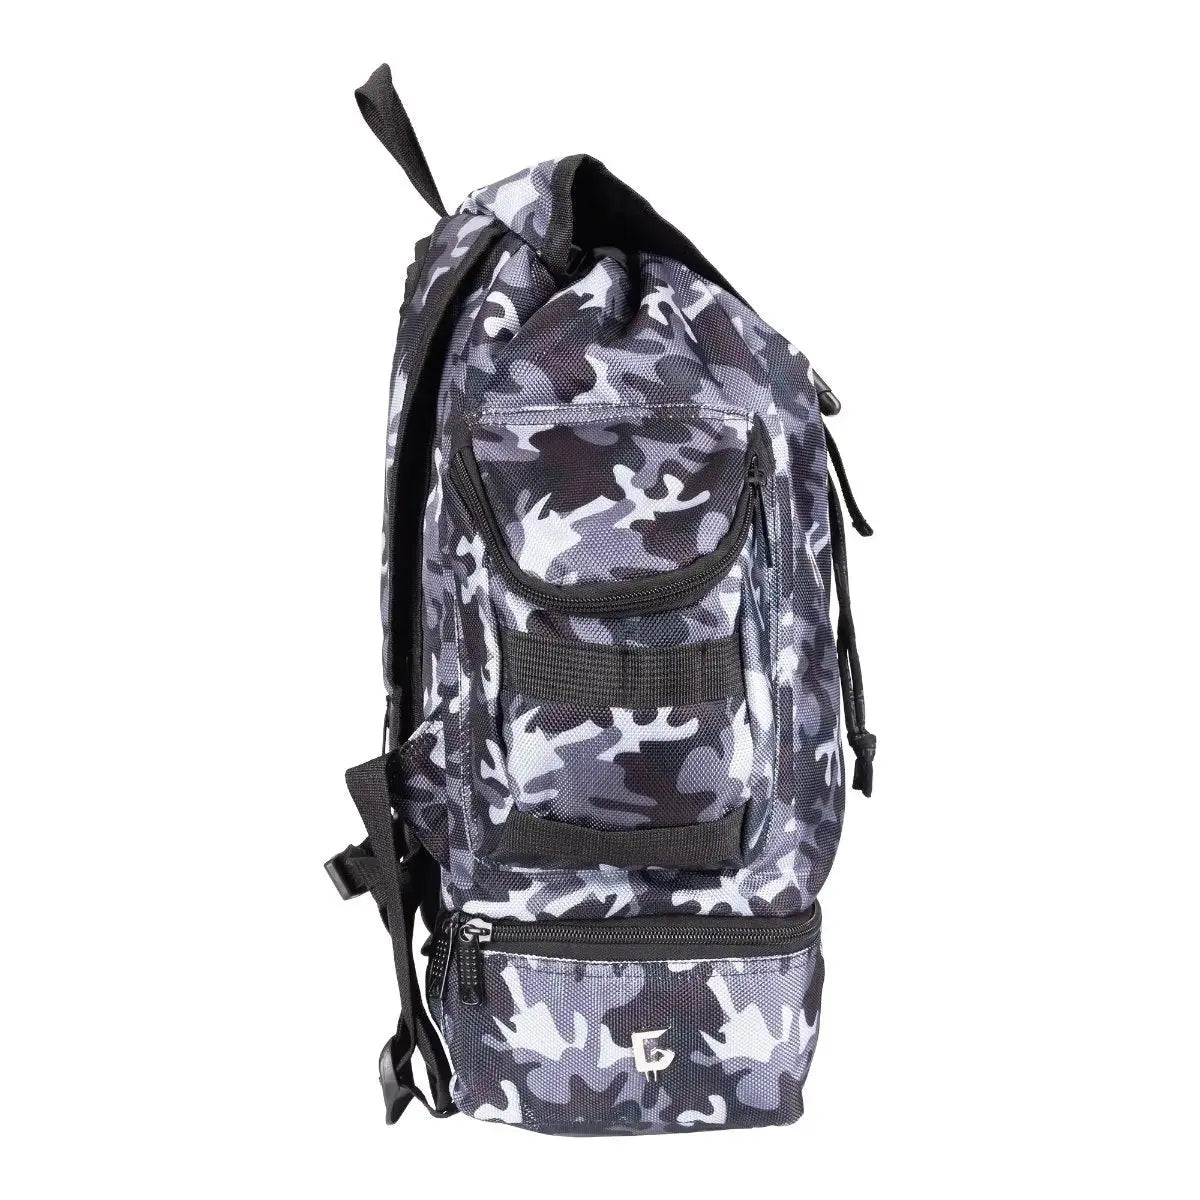 Clearance - Arctic White Camo Backpack - Gunsmith Fitness